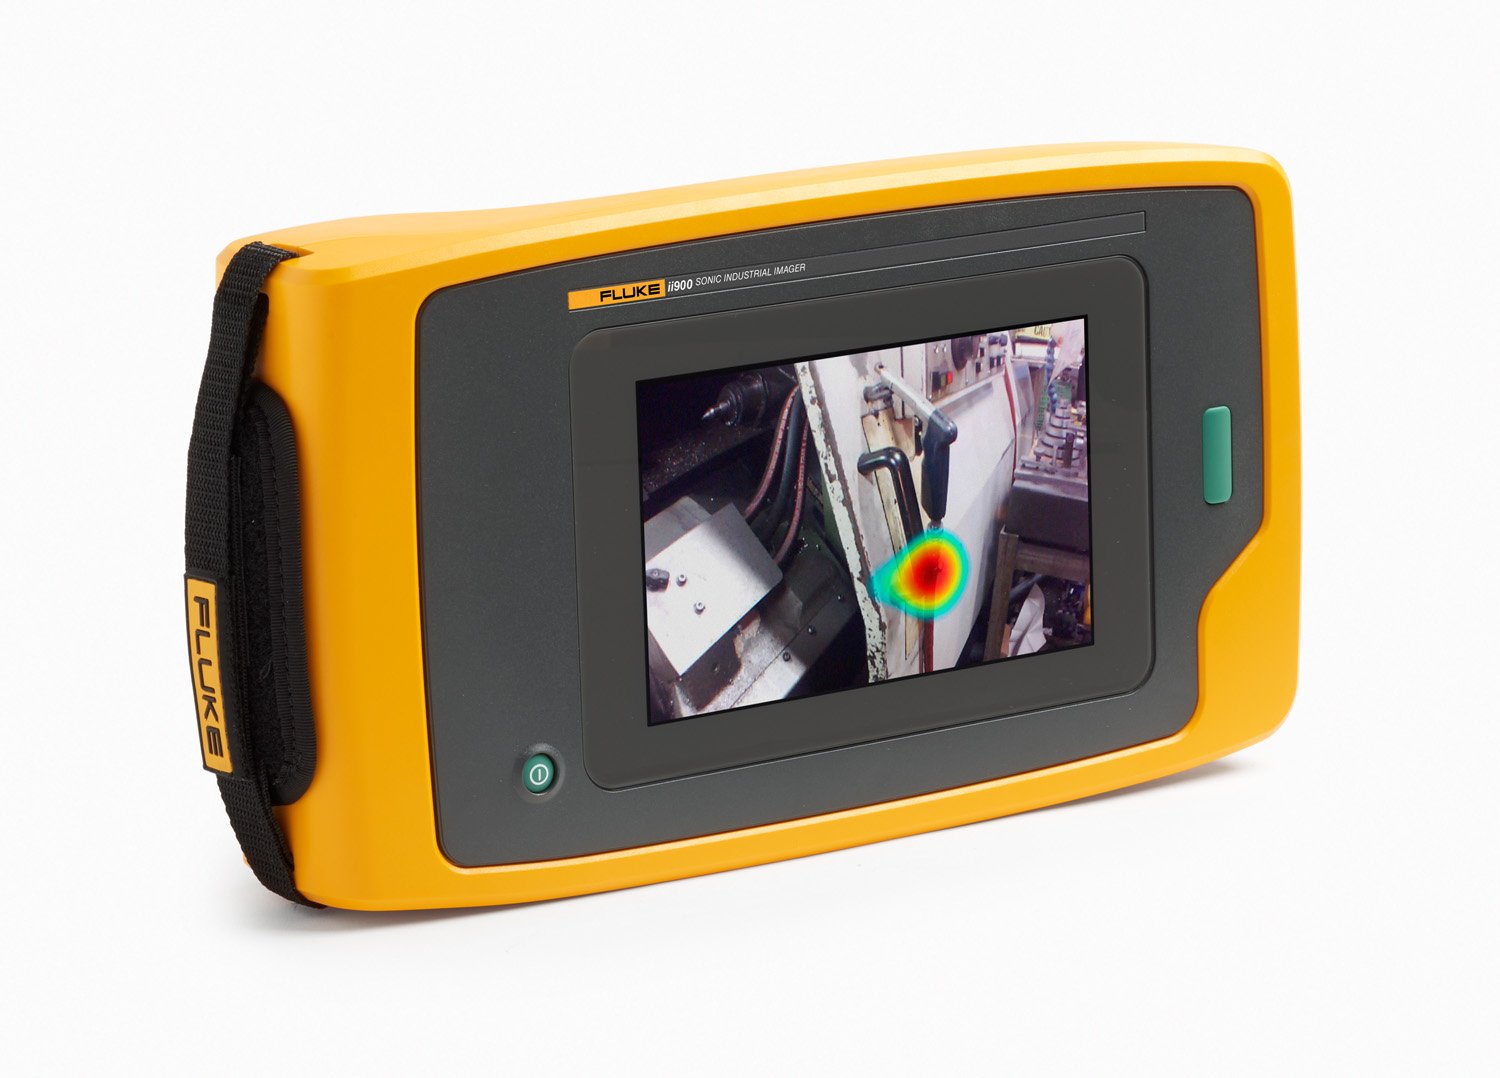 The Fluke ii900 Industrial Acoustic Imager scans areas up to 50 meters in normal industrial conditions.